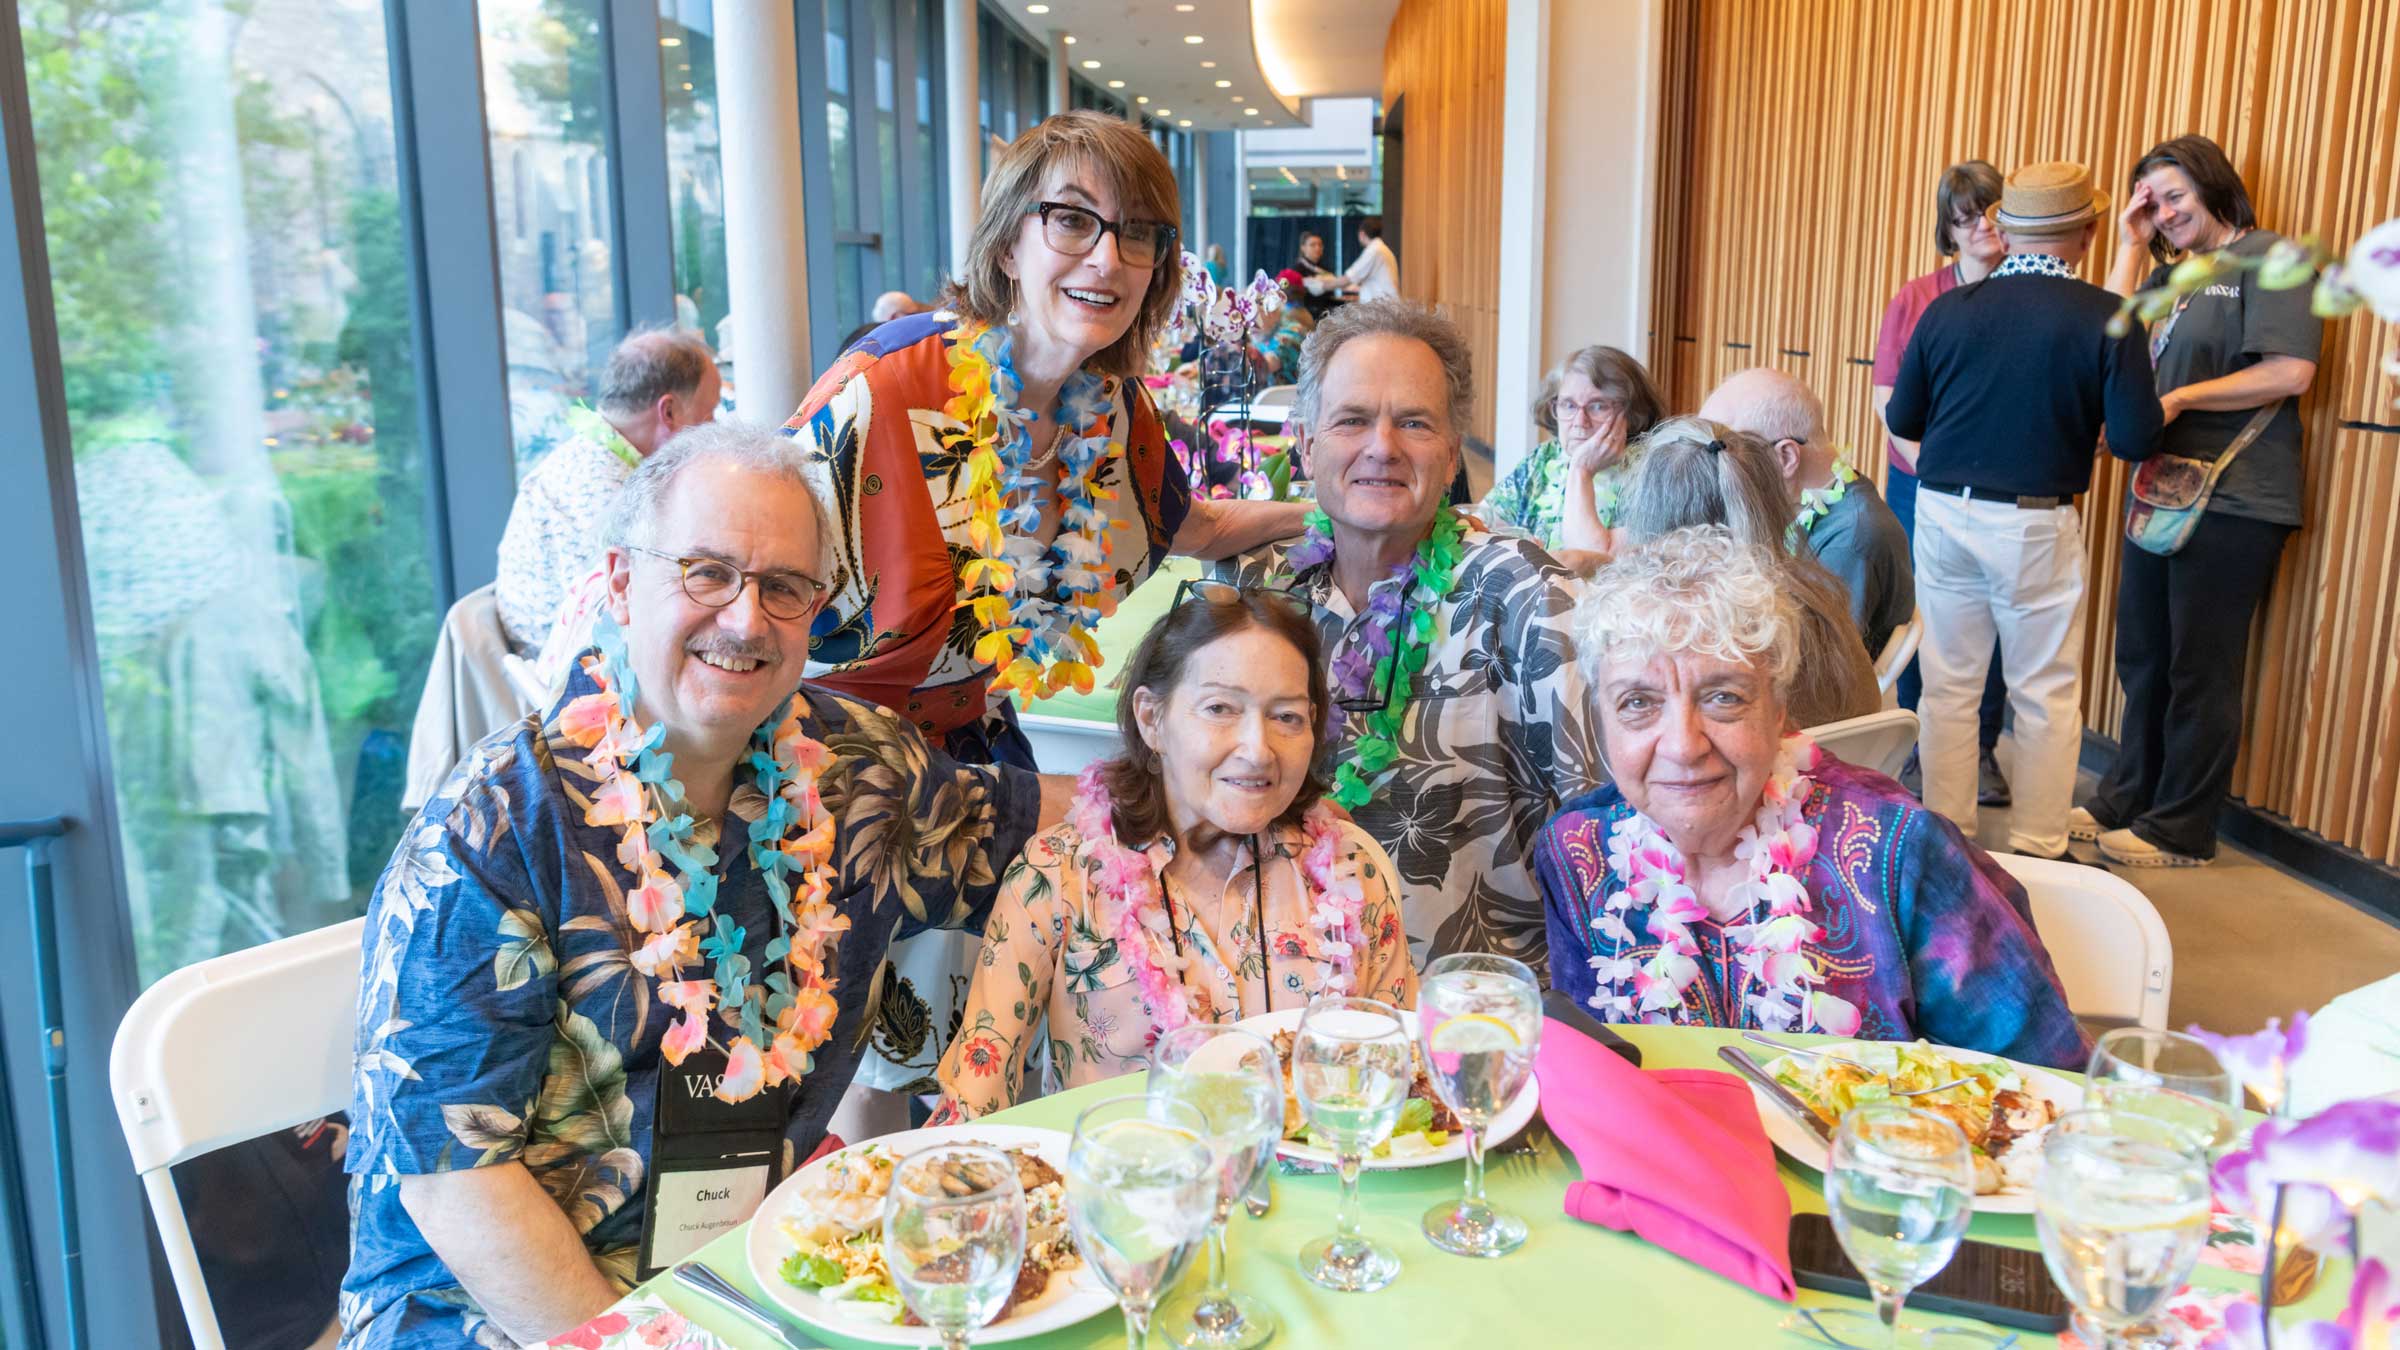 People standing and seated around a table with food wearing tropical print shirts and leis.